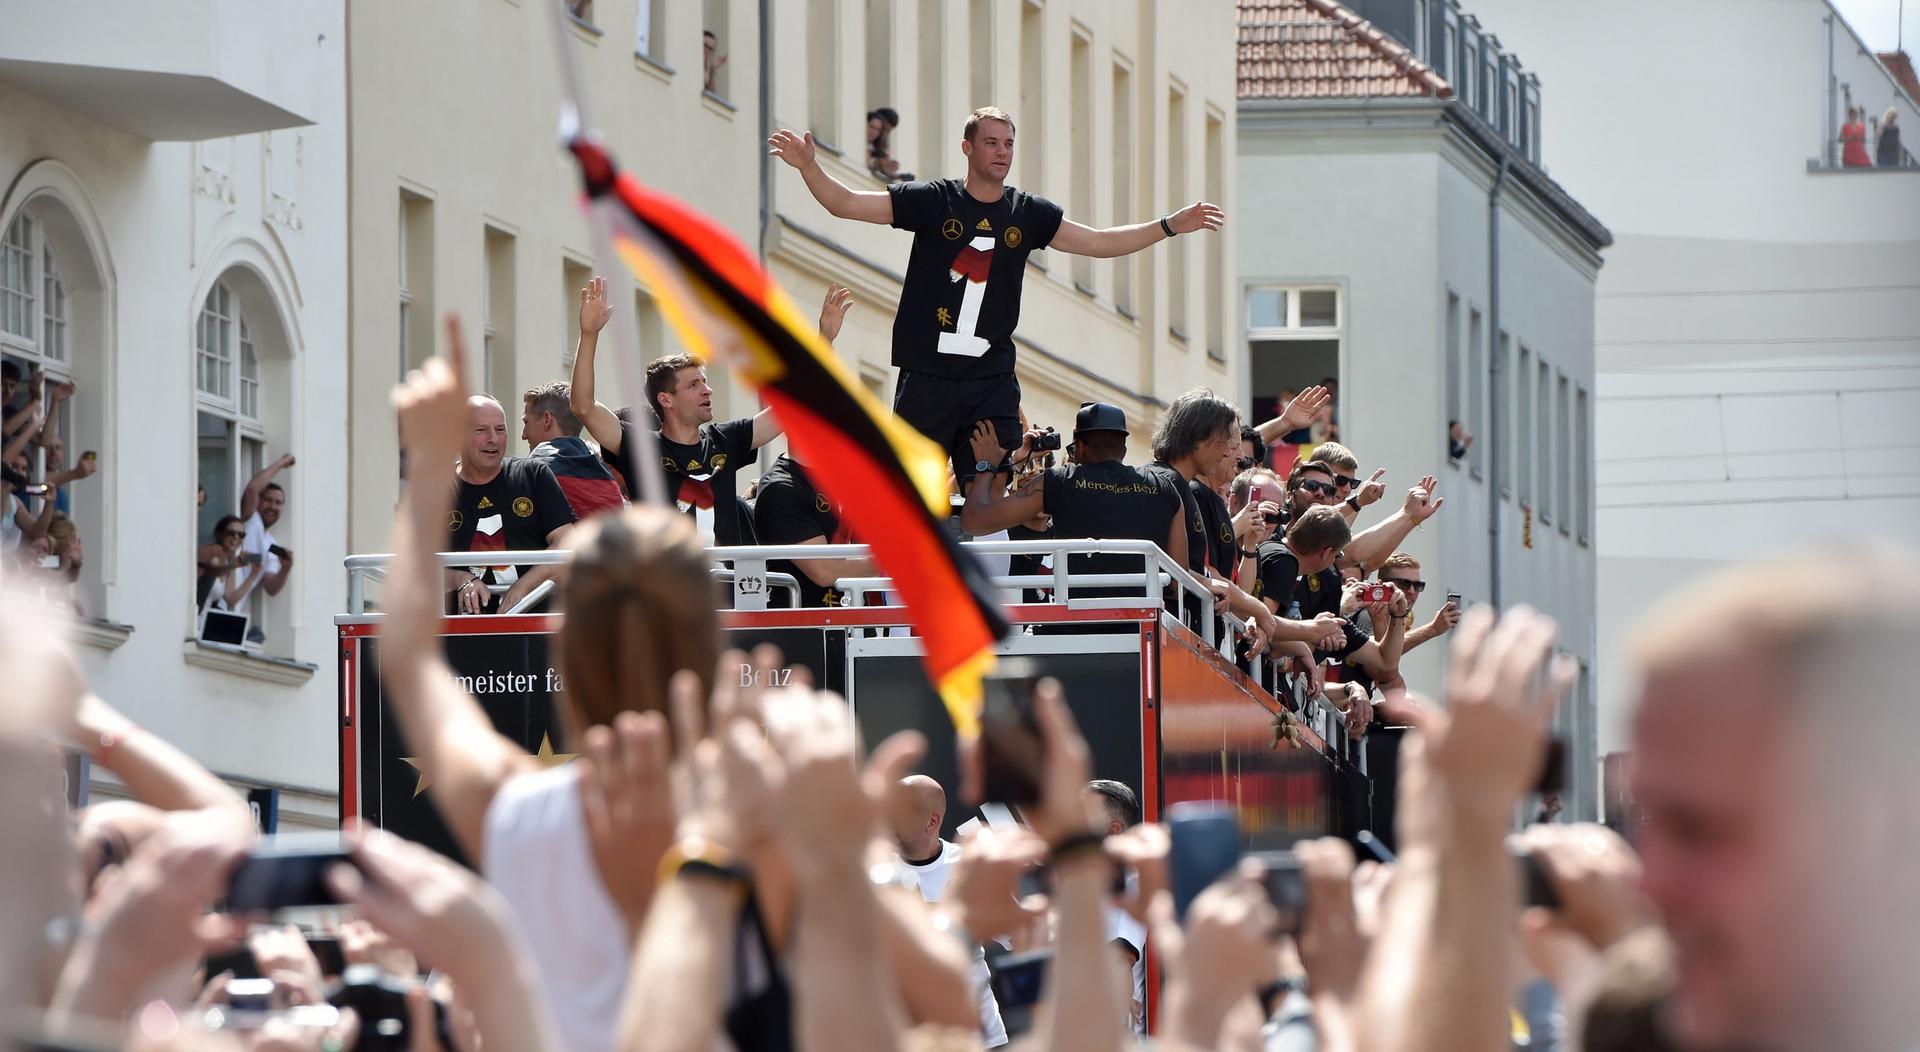 Germany goalkeeper Manuel Neuer gestures to fans during the drive along the so-called "Fan Meile" at Brandenburg Gate in Berlin on Tuesday. Photo: EPA 